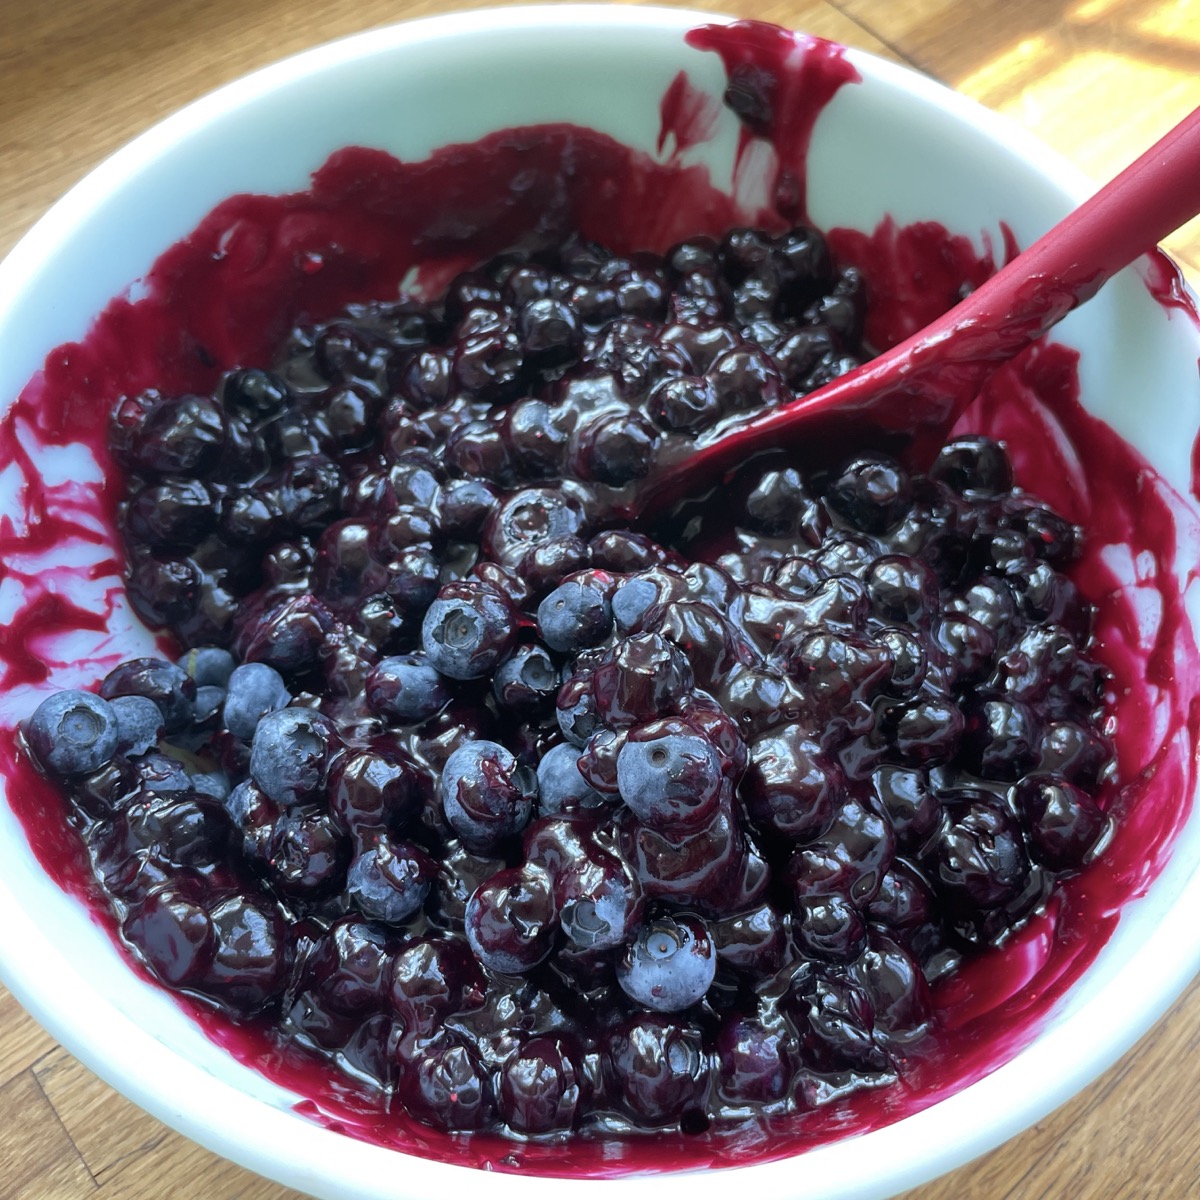 Fresh blueberries mixed with simmered berries and sugar in a bowl.